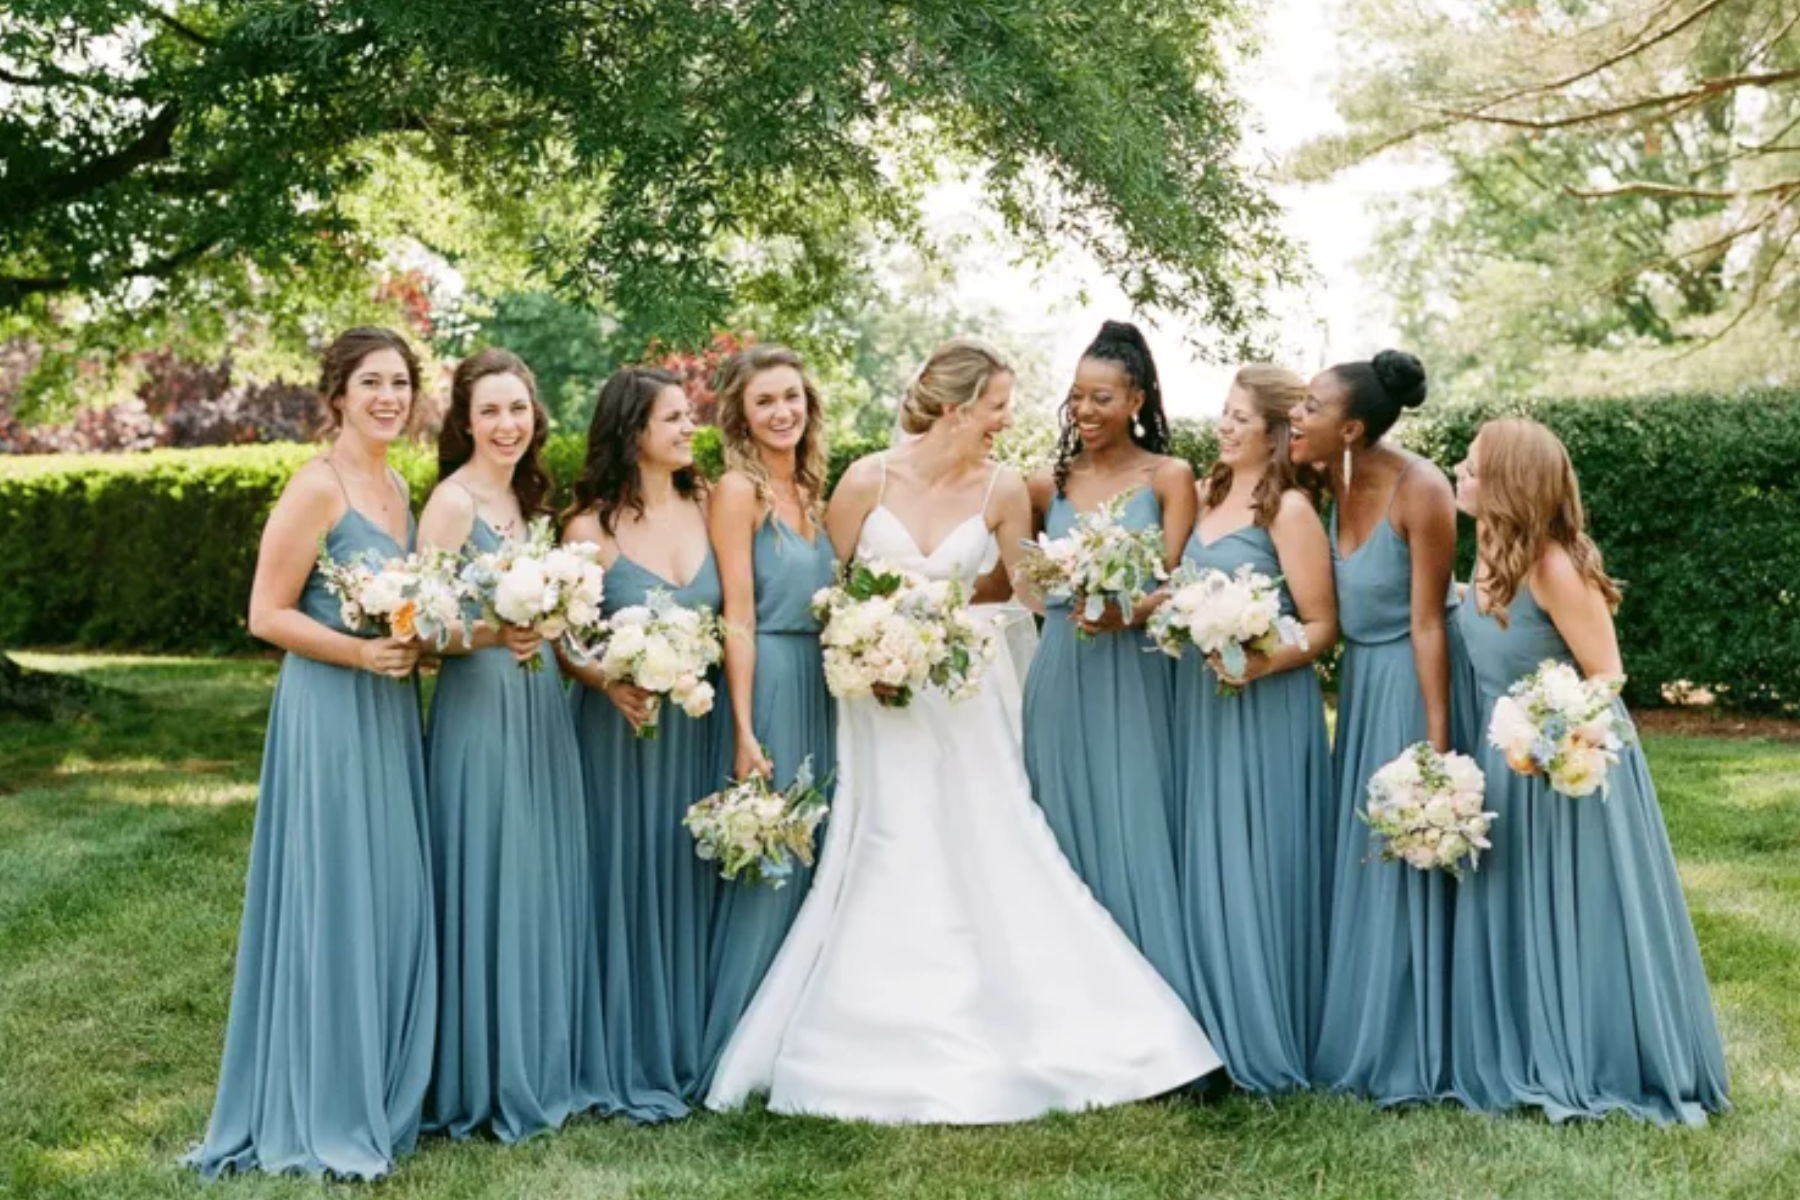 A bride and her bridesmaids in the garden